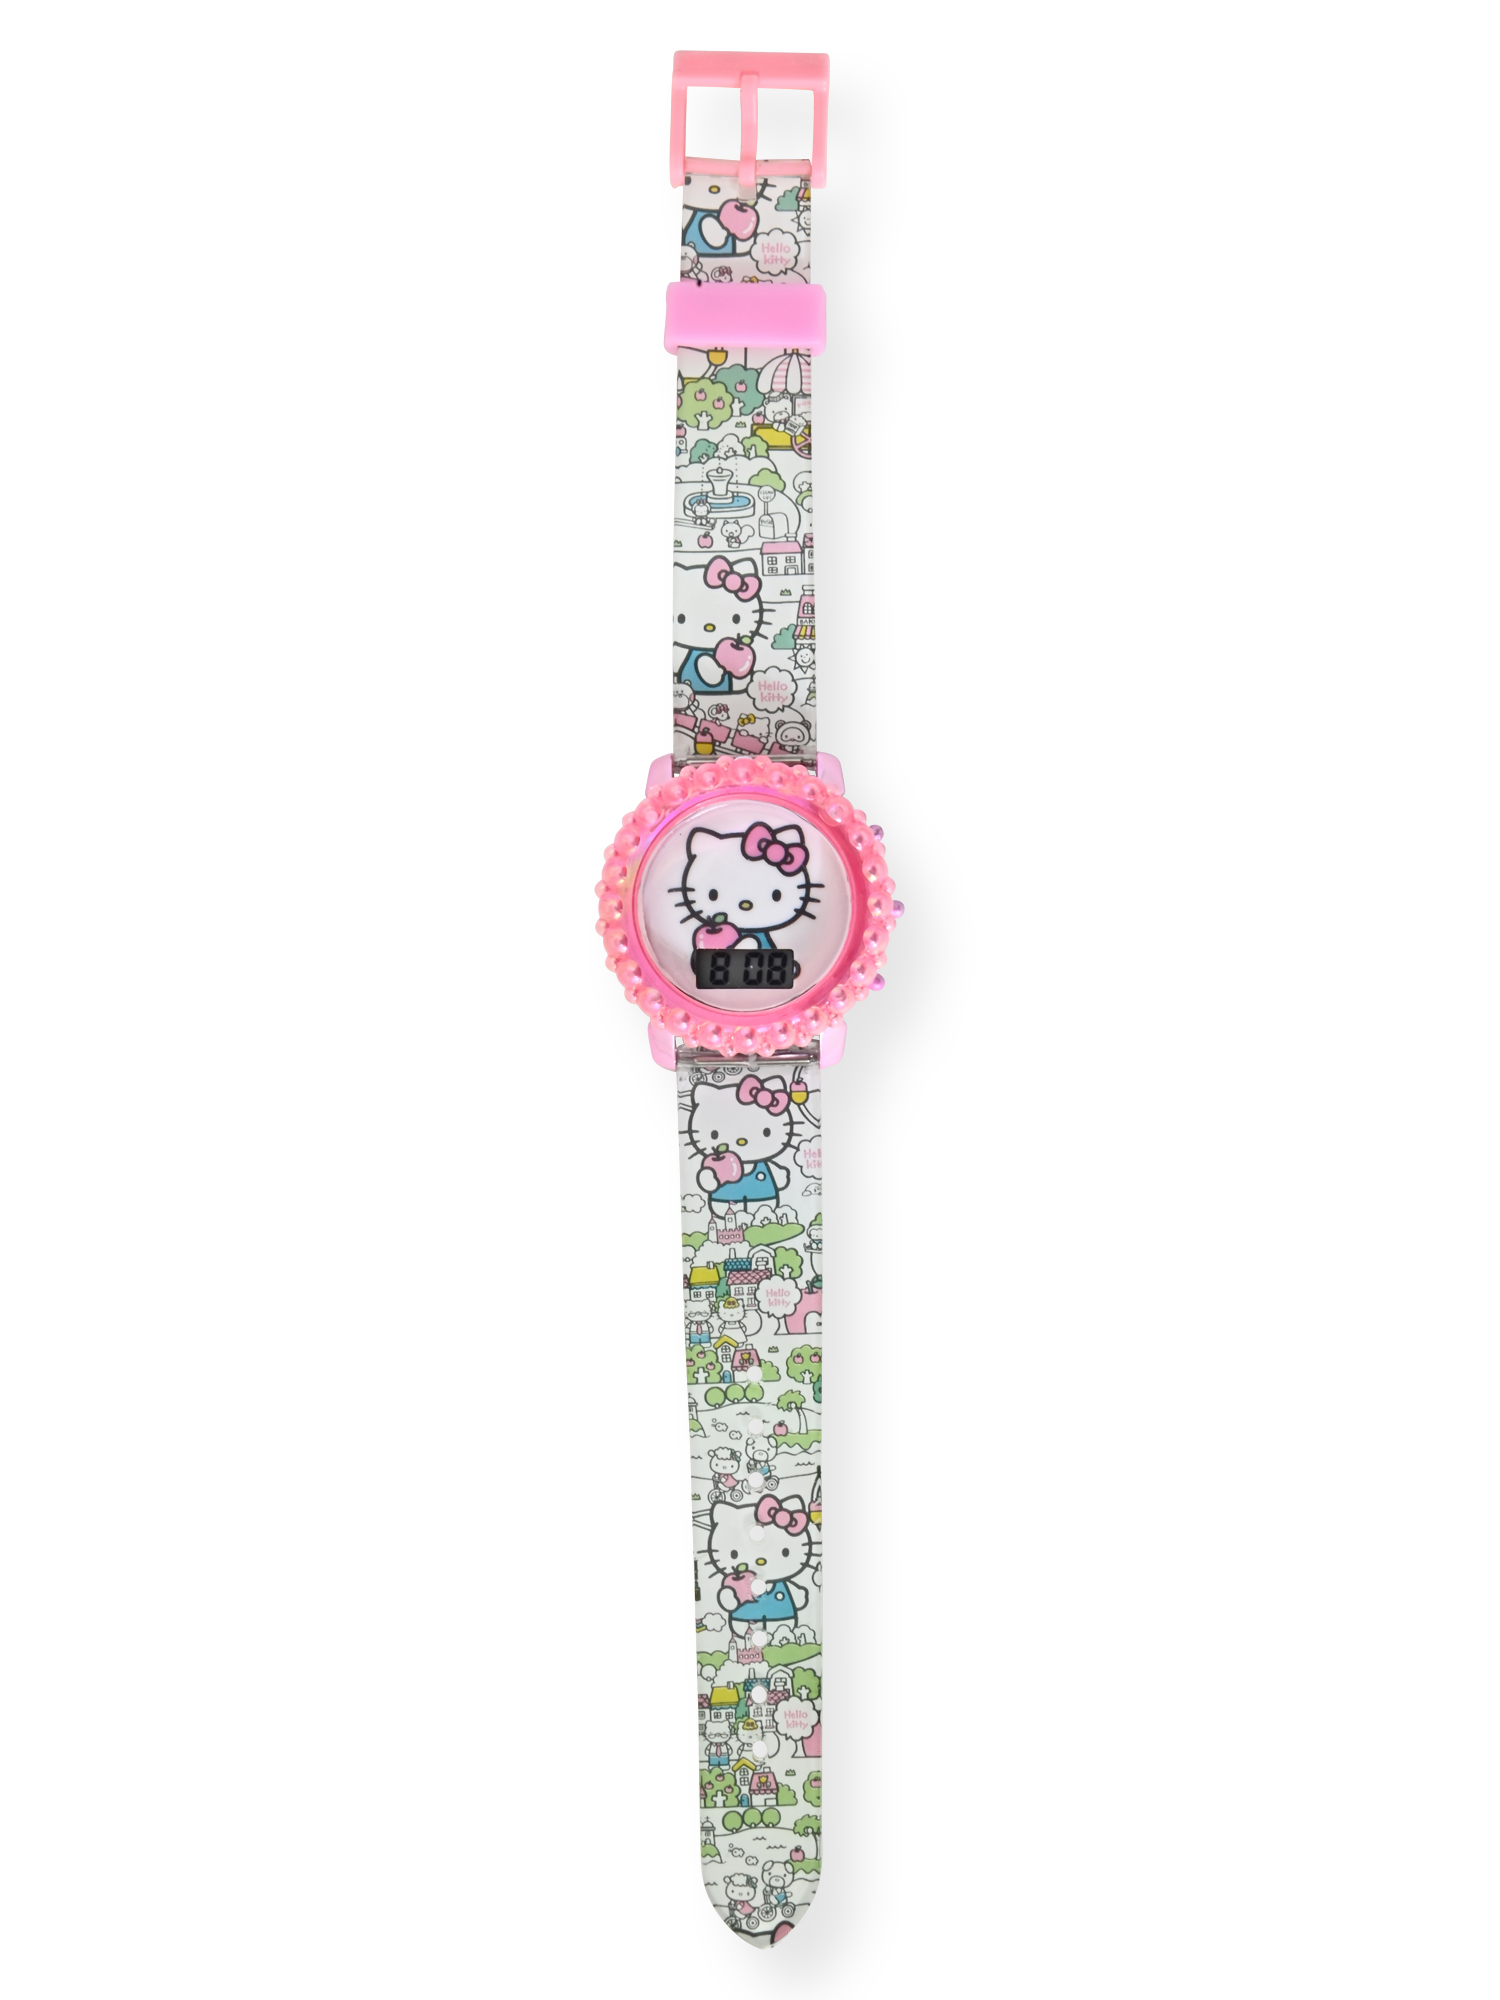 HK4166WM Hello Kitty Kids Molded Case Flashing Lights LCD Watch with Printed Strap - image 2 of 3